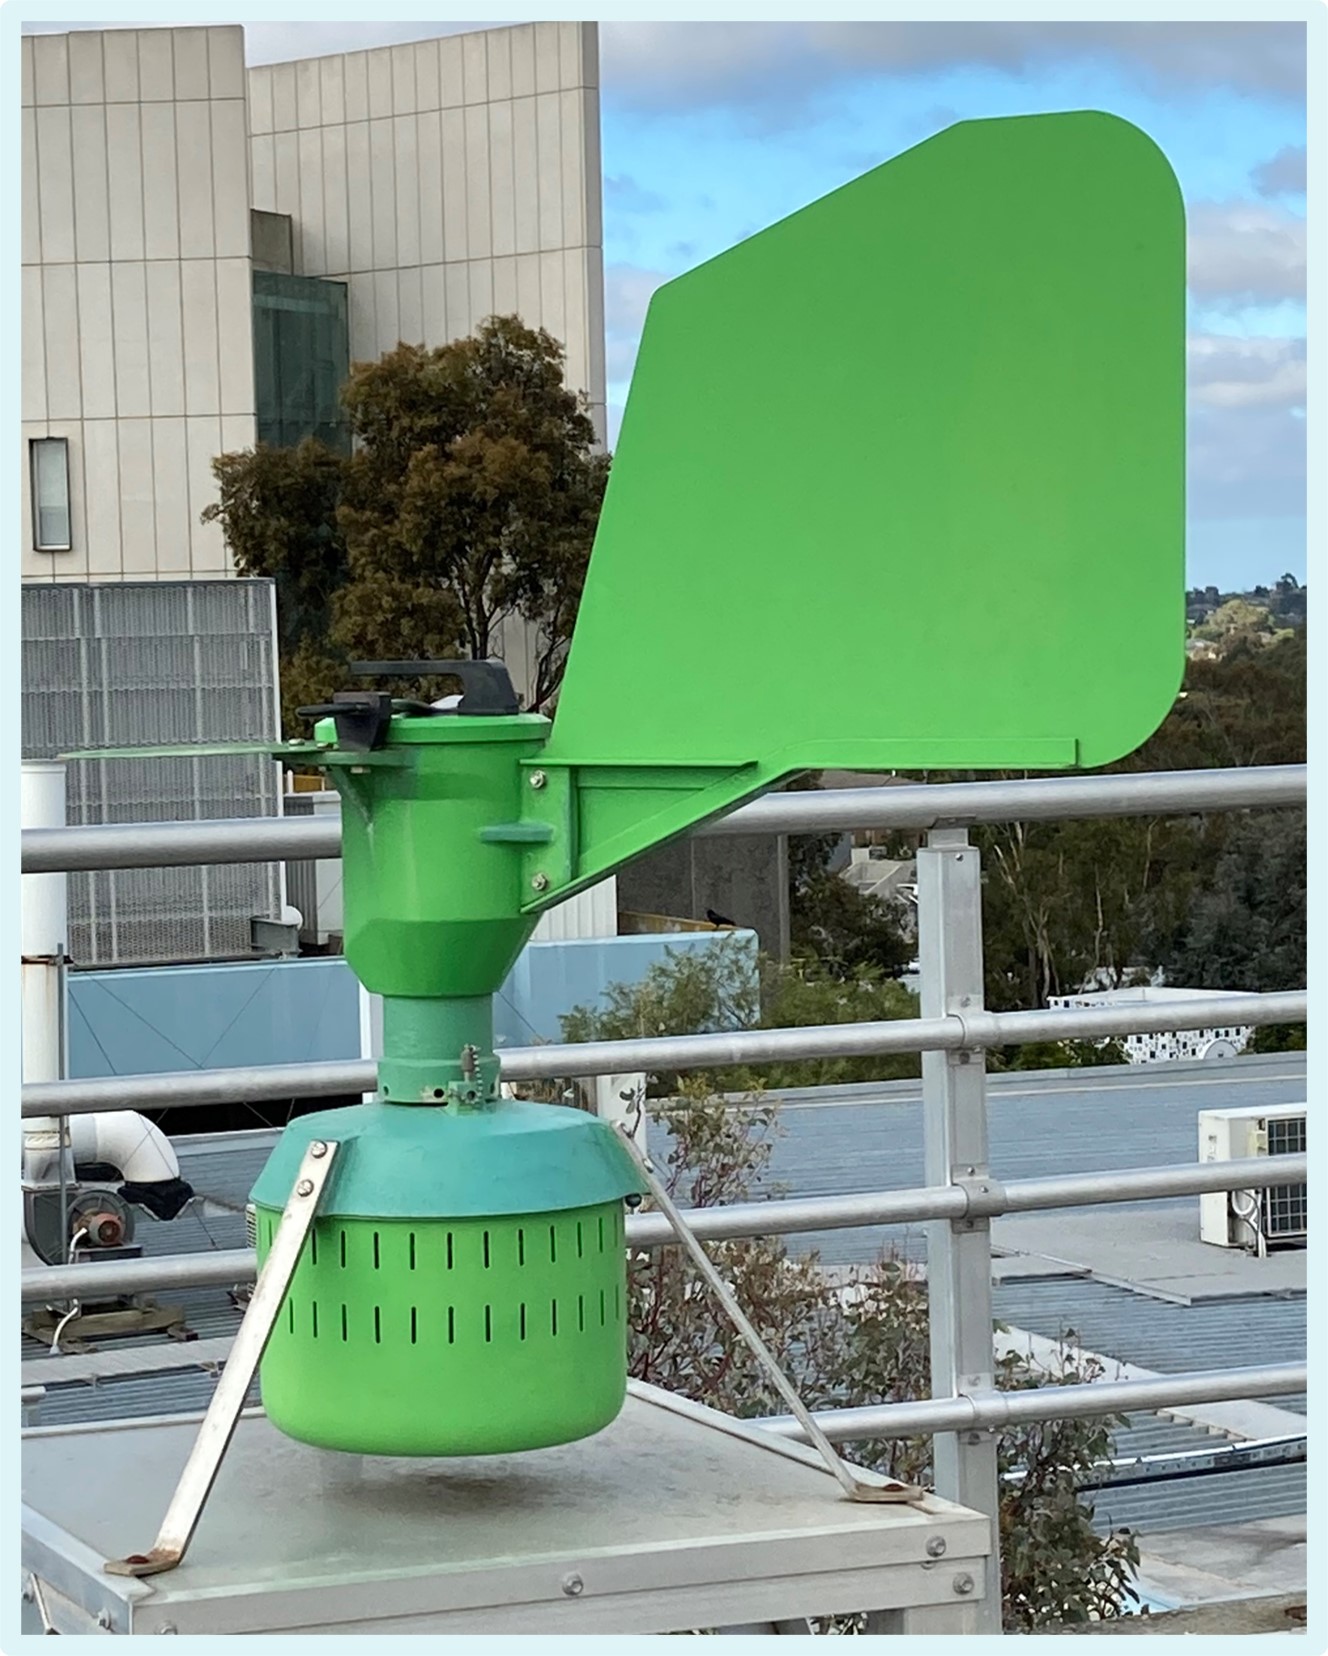 A roof-mounted device with a large green sail and a chamber